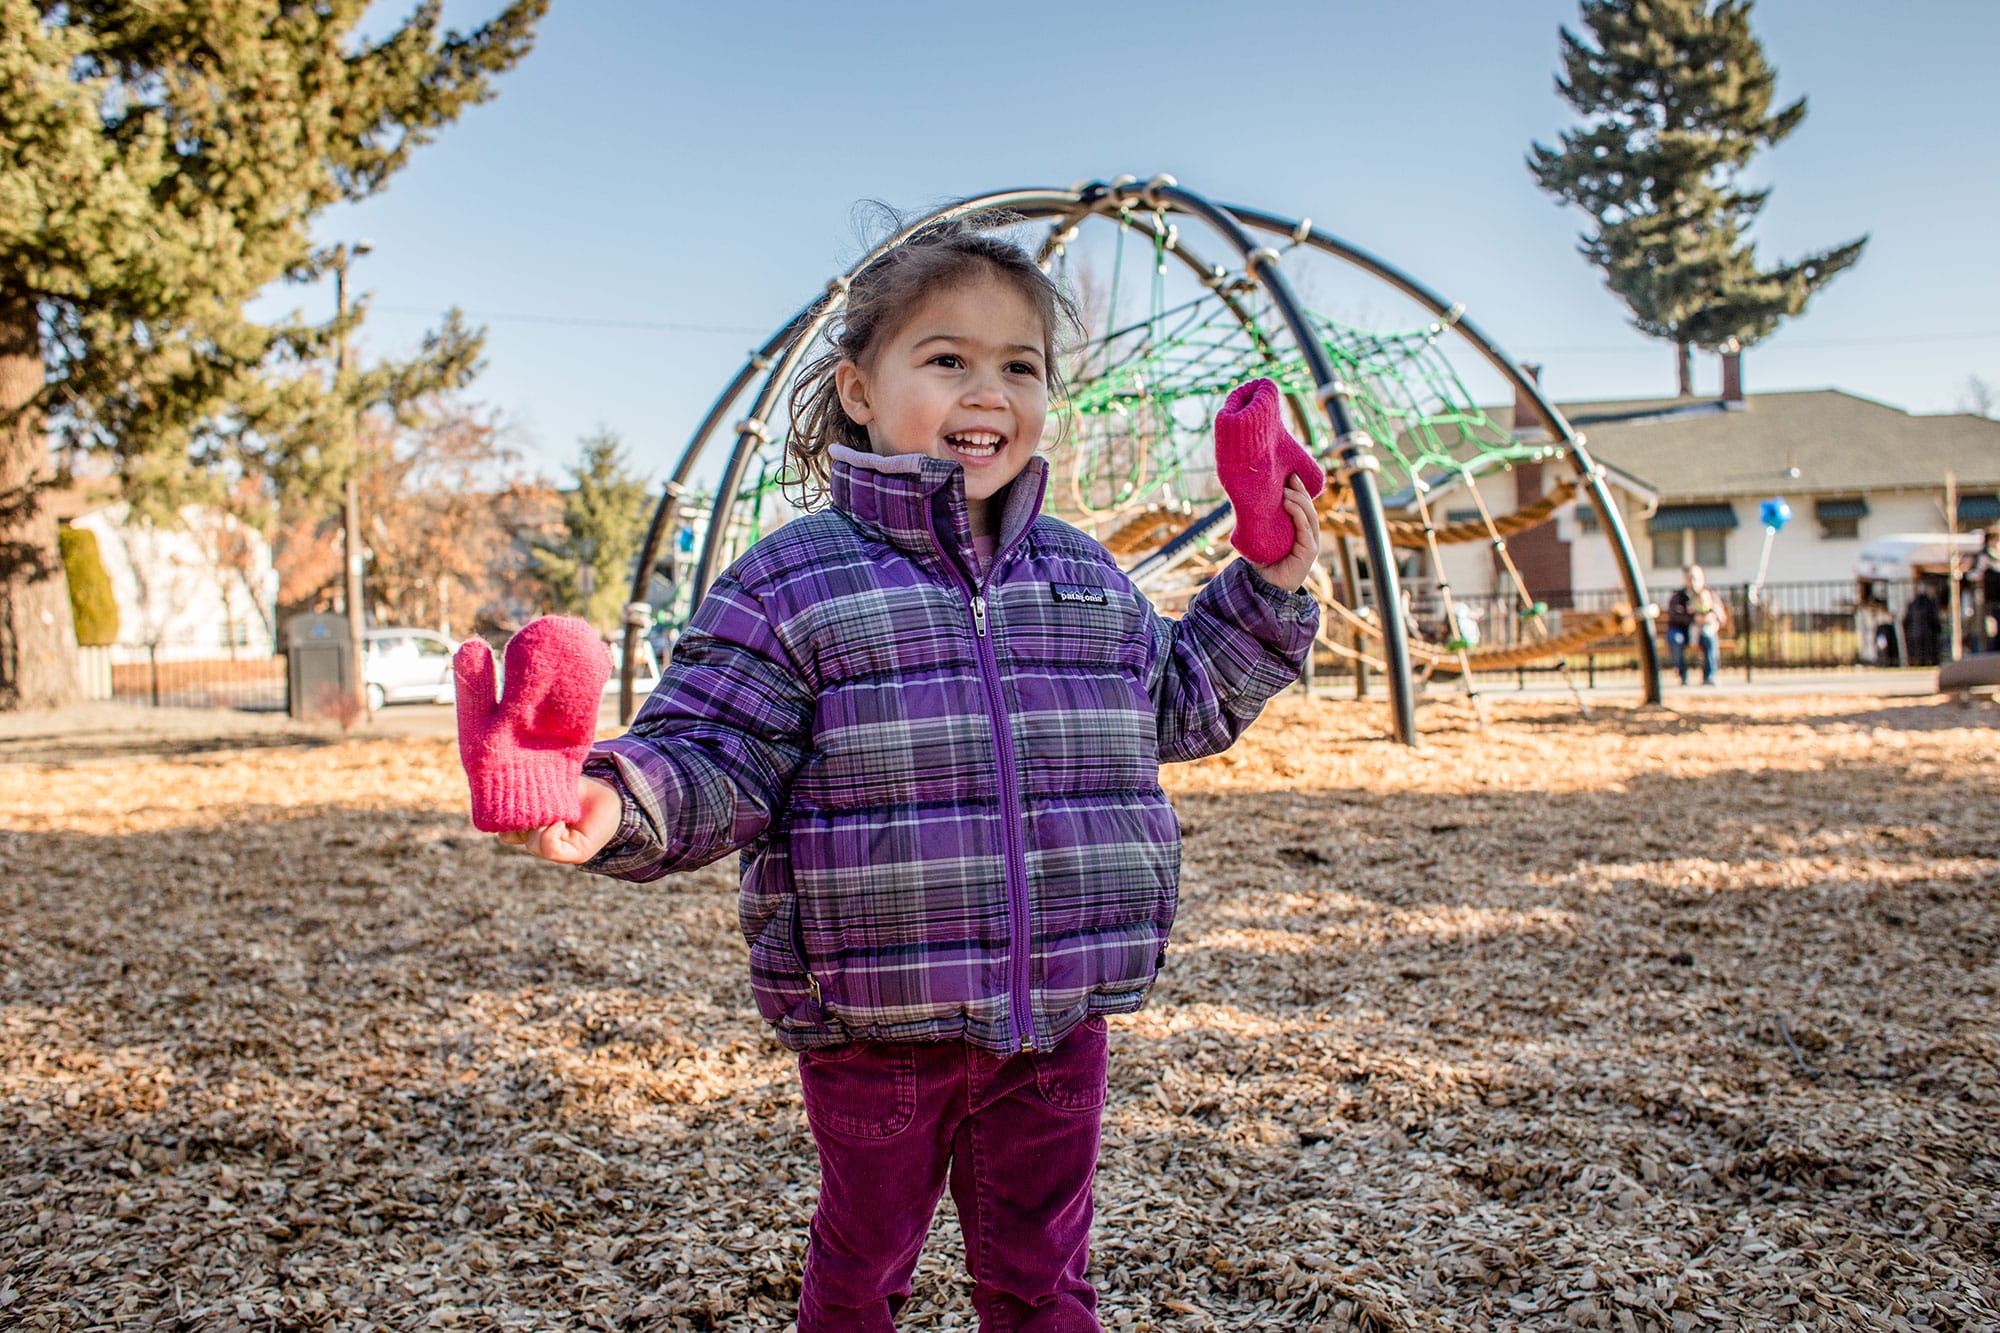 A little girl in a purple jacket standing in a playground.